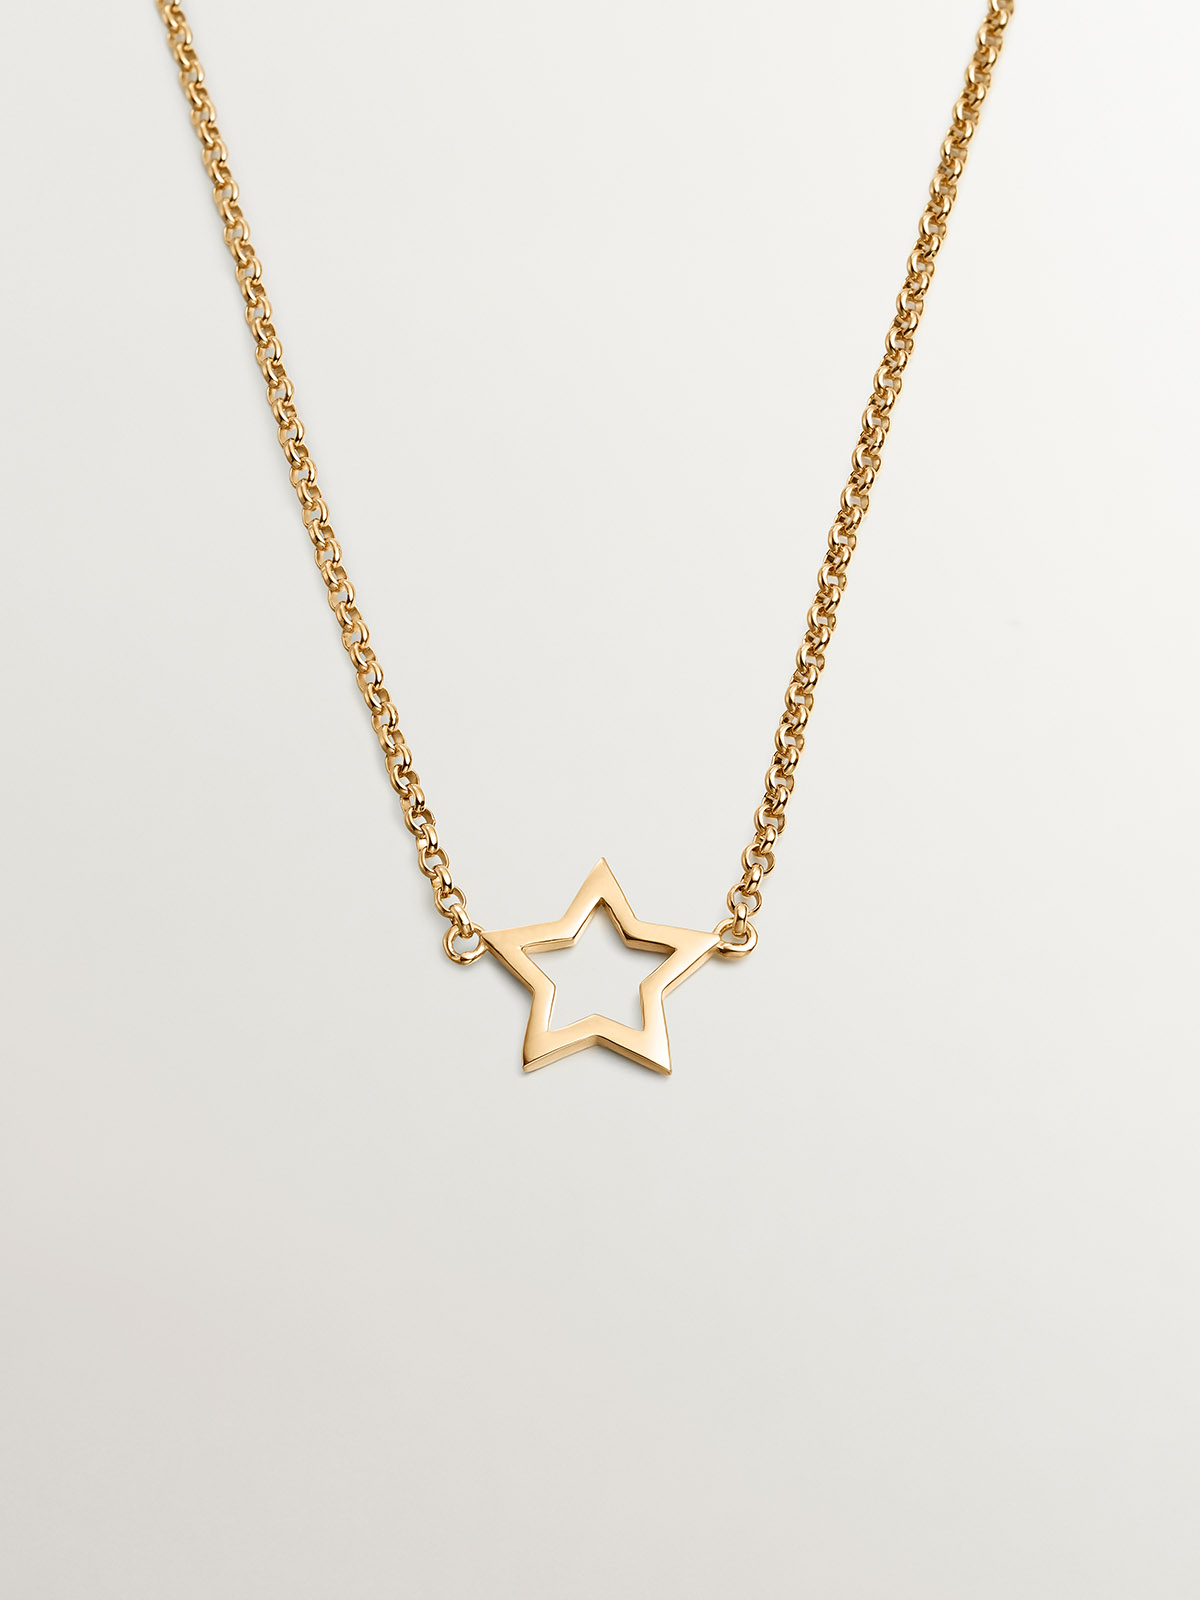 925 silver pendant bathed in 18K yellow gold with star